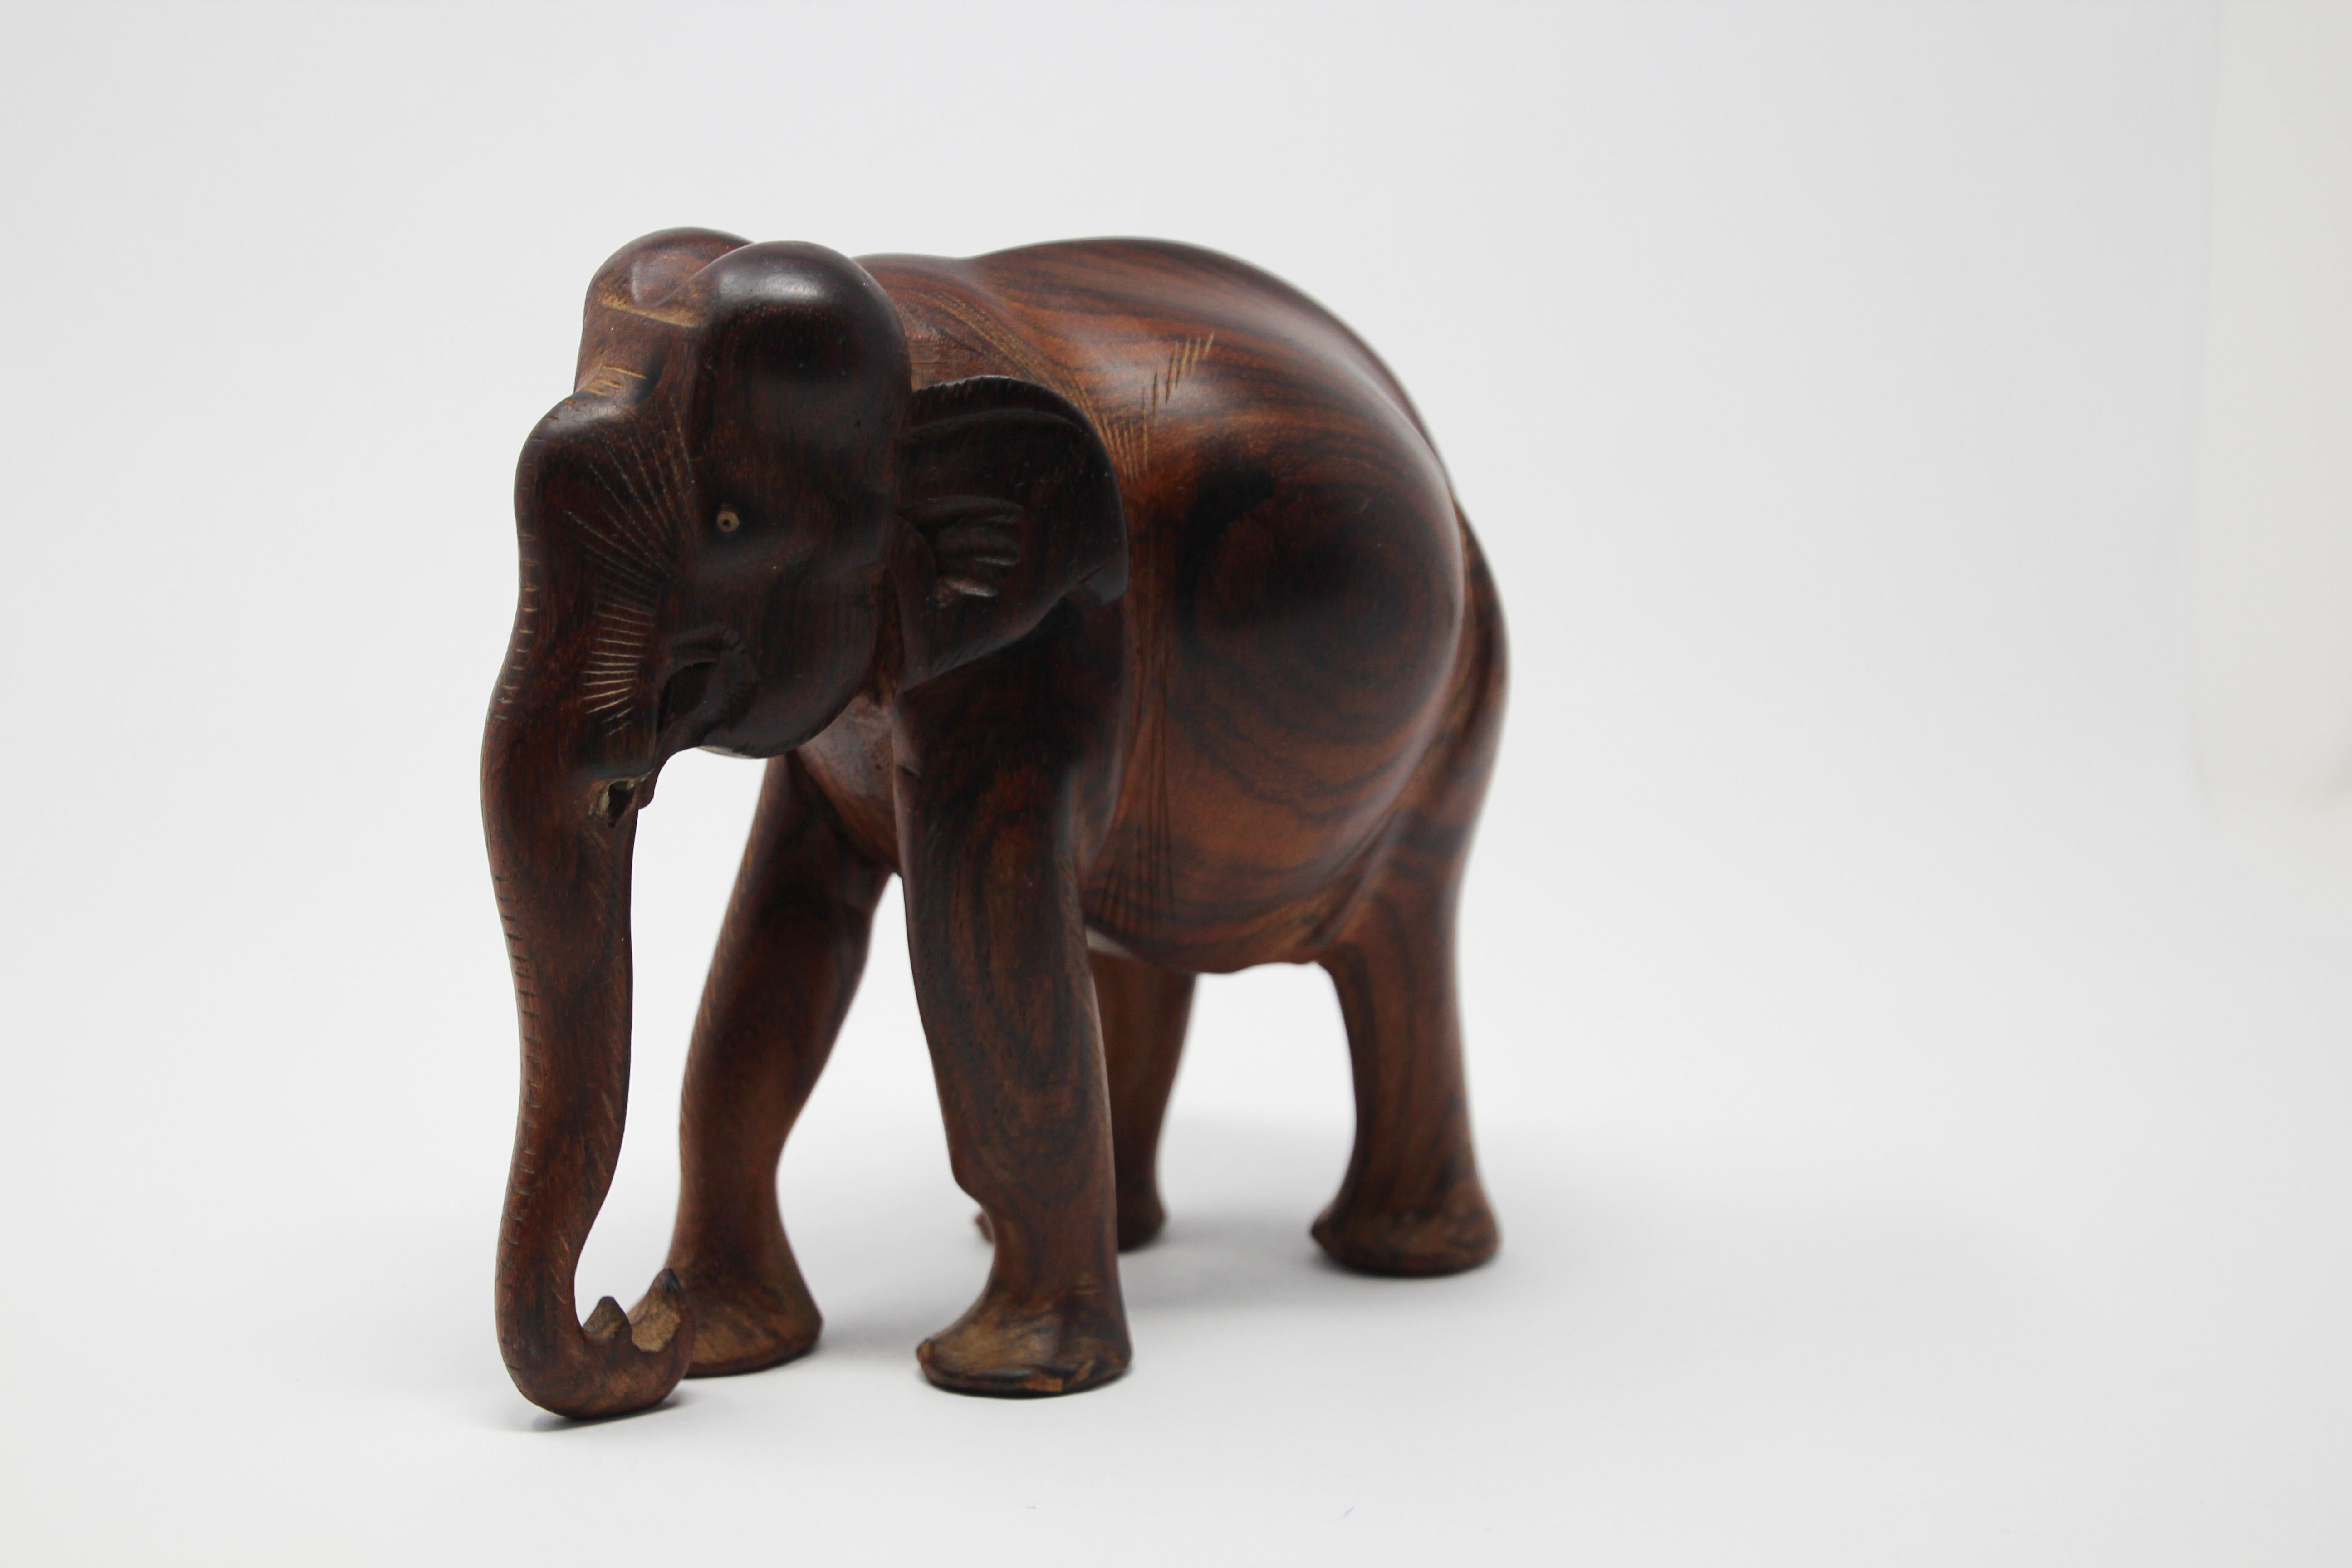 Hand-Carved African Ebony Wood Hand Carved Elephant